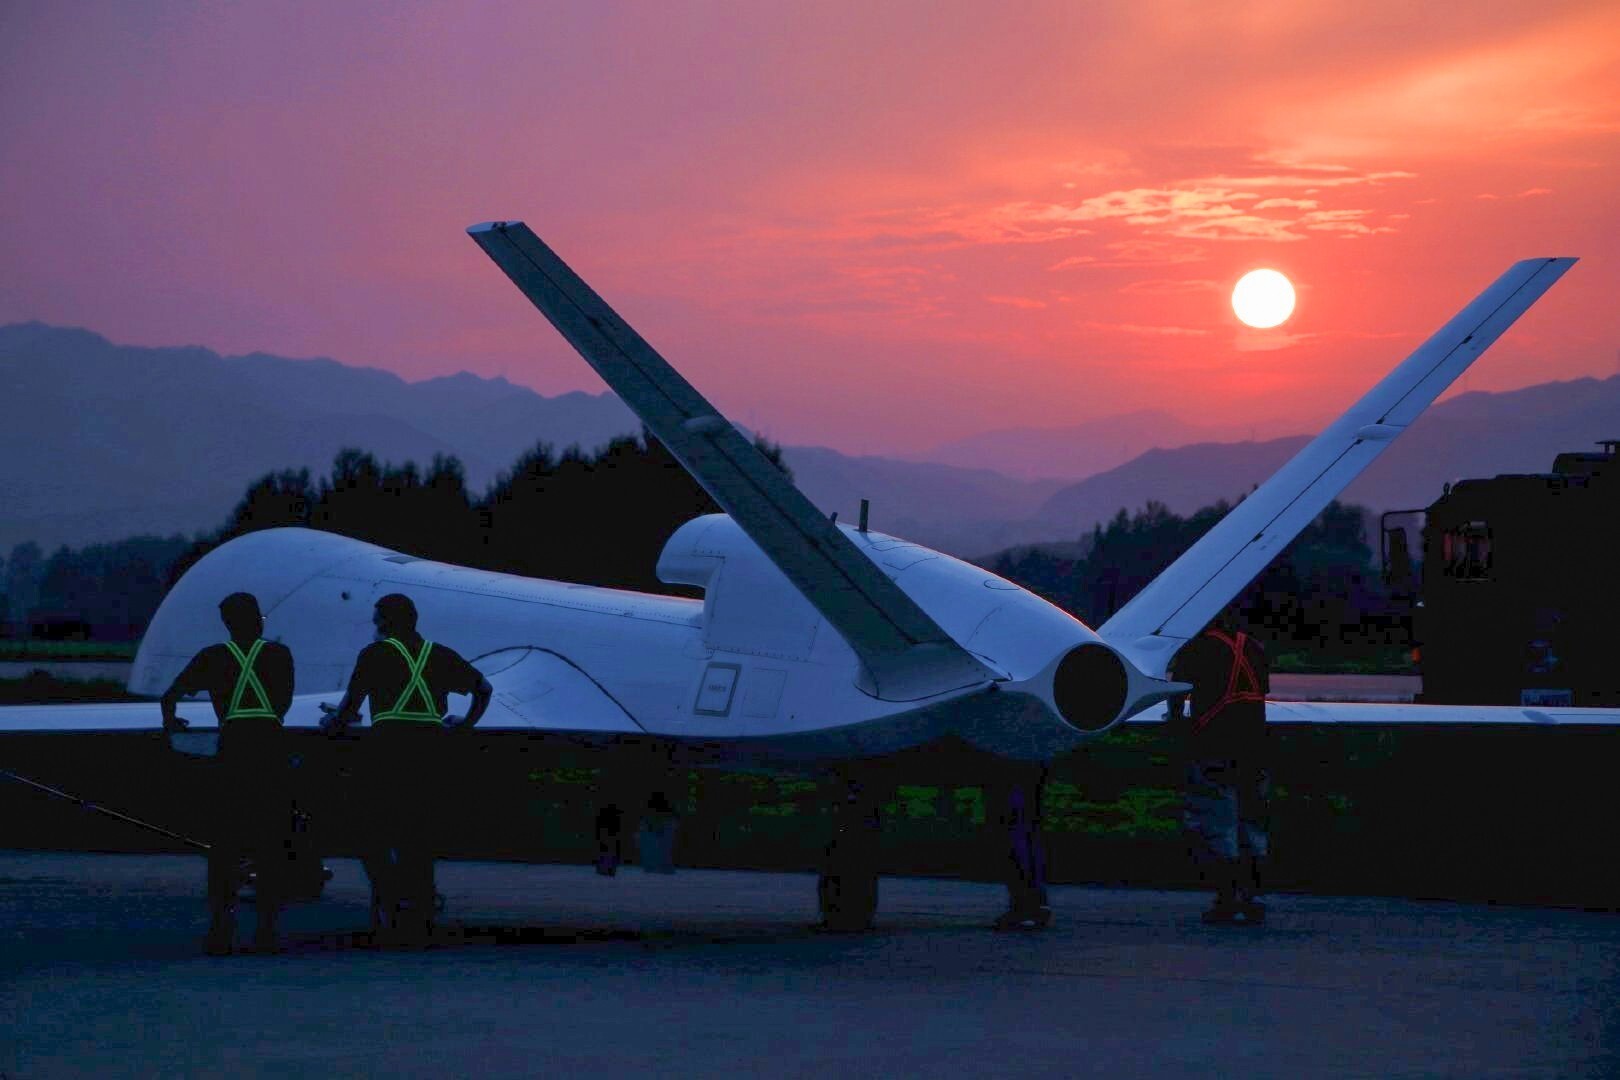 China’s WJ-700 drone is powered by a jet engine and can fly at altitudes of up to 12,000 metres. Photo: Weibo